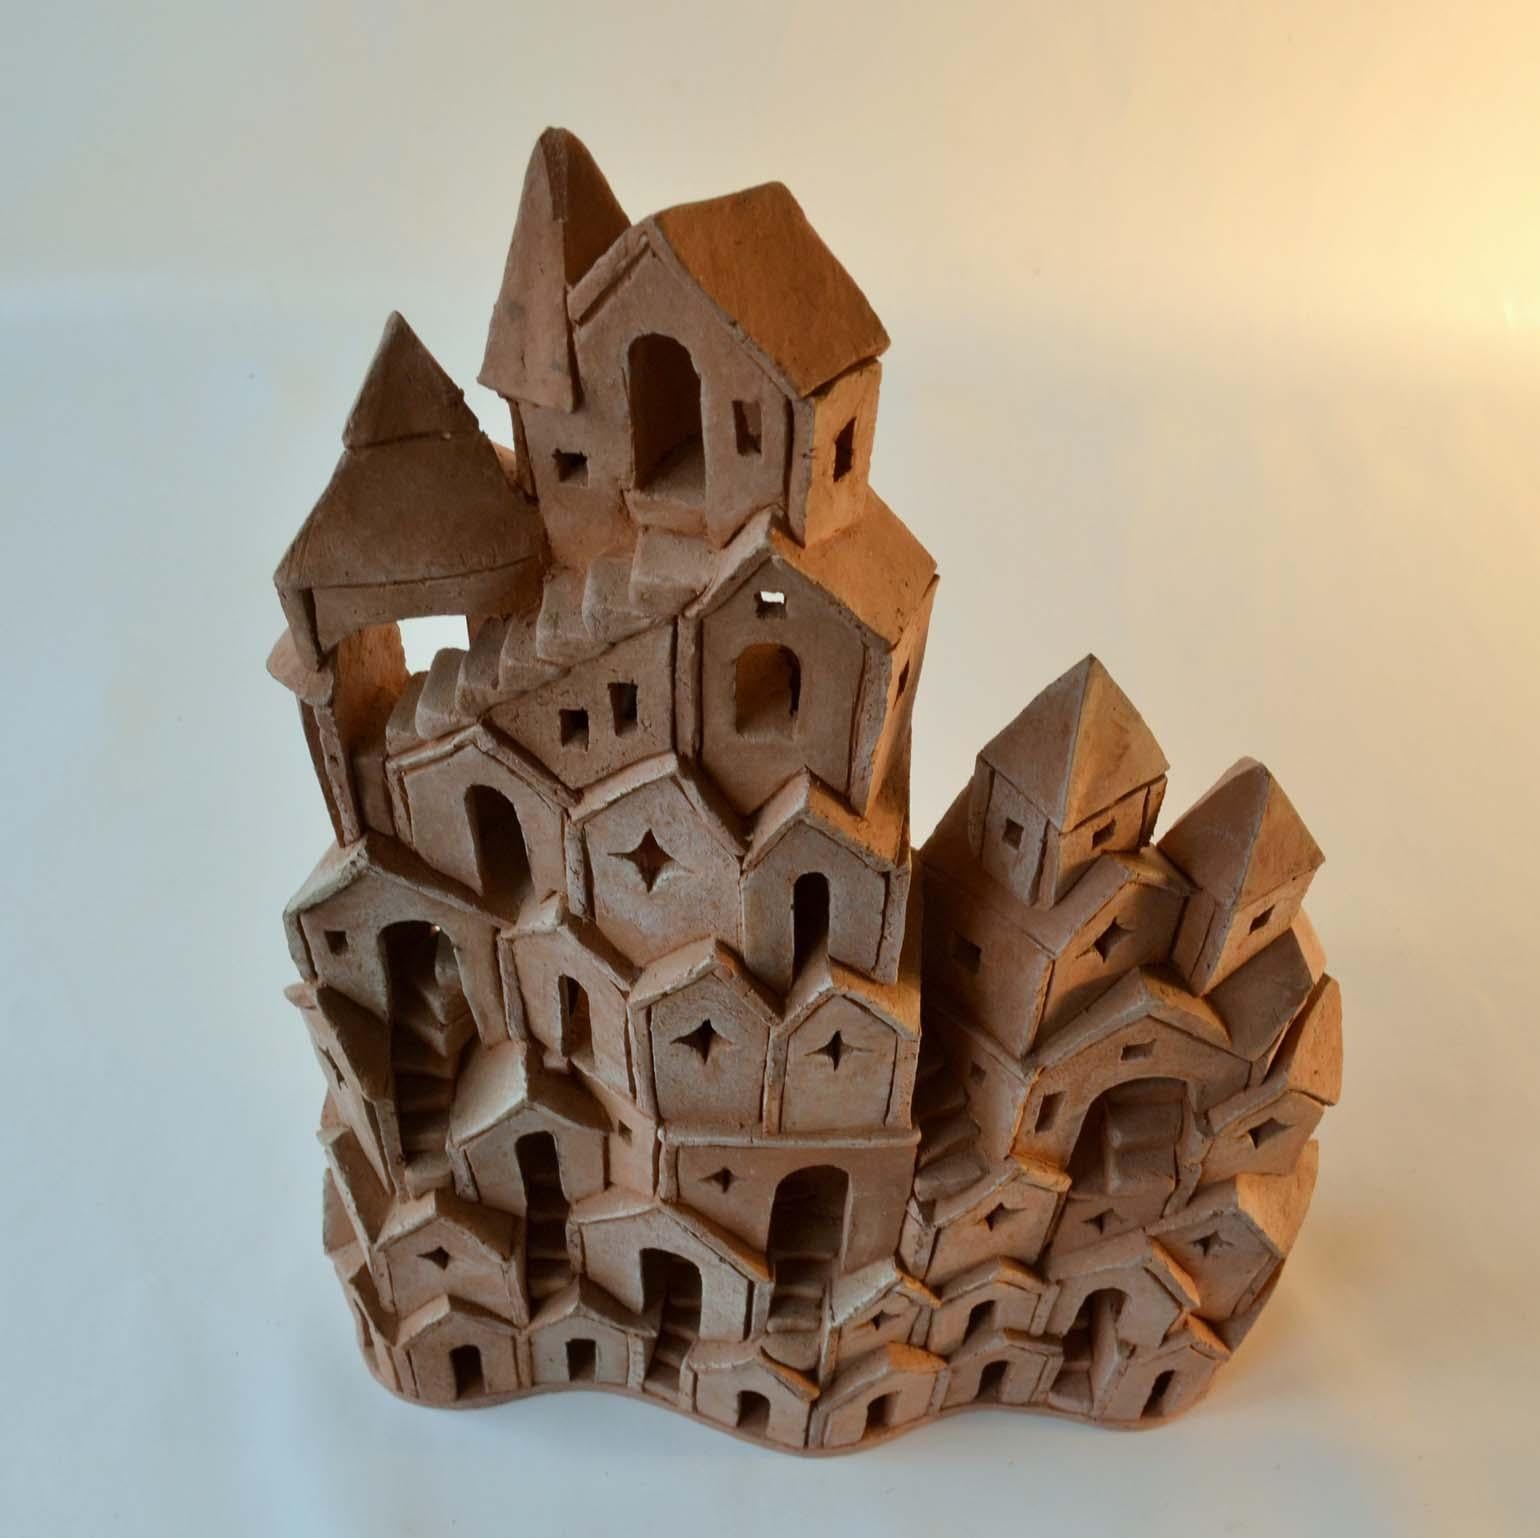 Architectural Surreal Ceramic Tower Sculpture 2 by Dutch Arie Bouter 1995 5